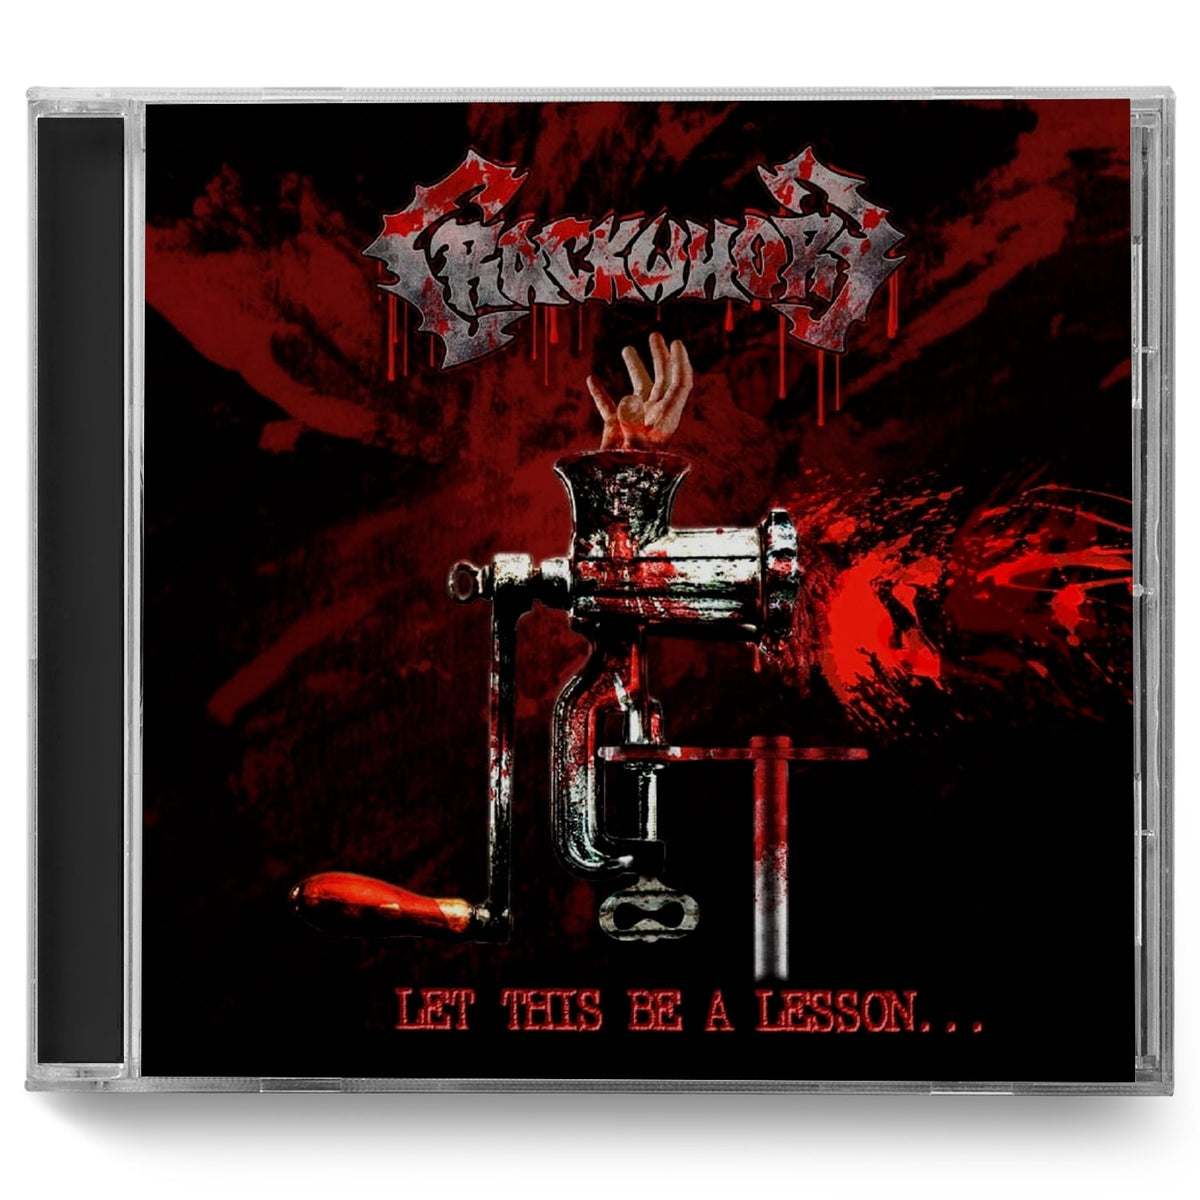 Crackwh*re "Let This Be A Lesson…" CD - Miasma Records